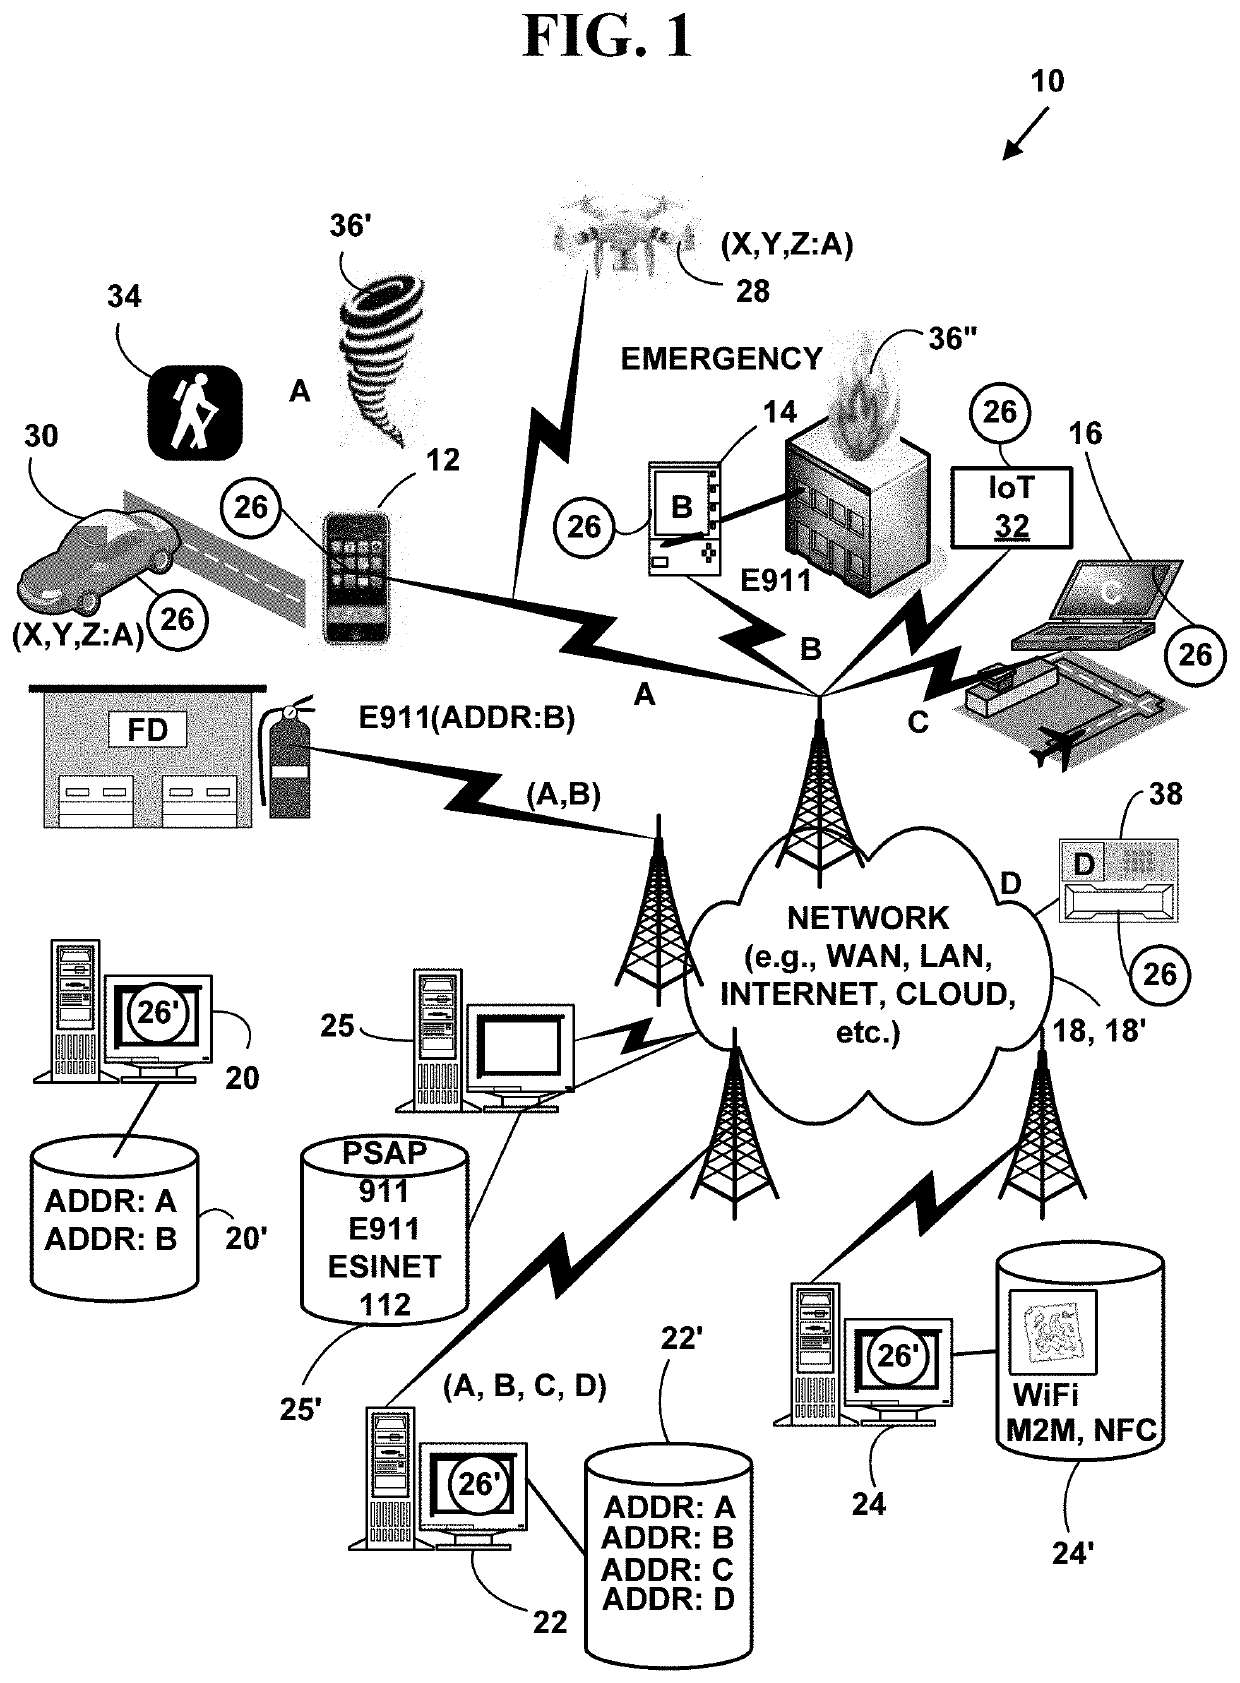 Method and system for locating a network device in an emergency situation including public location information